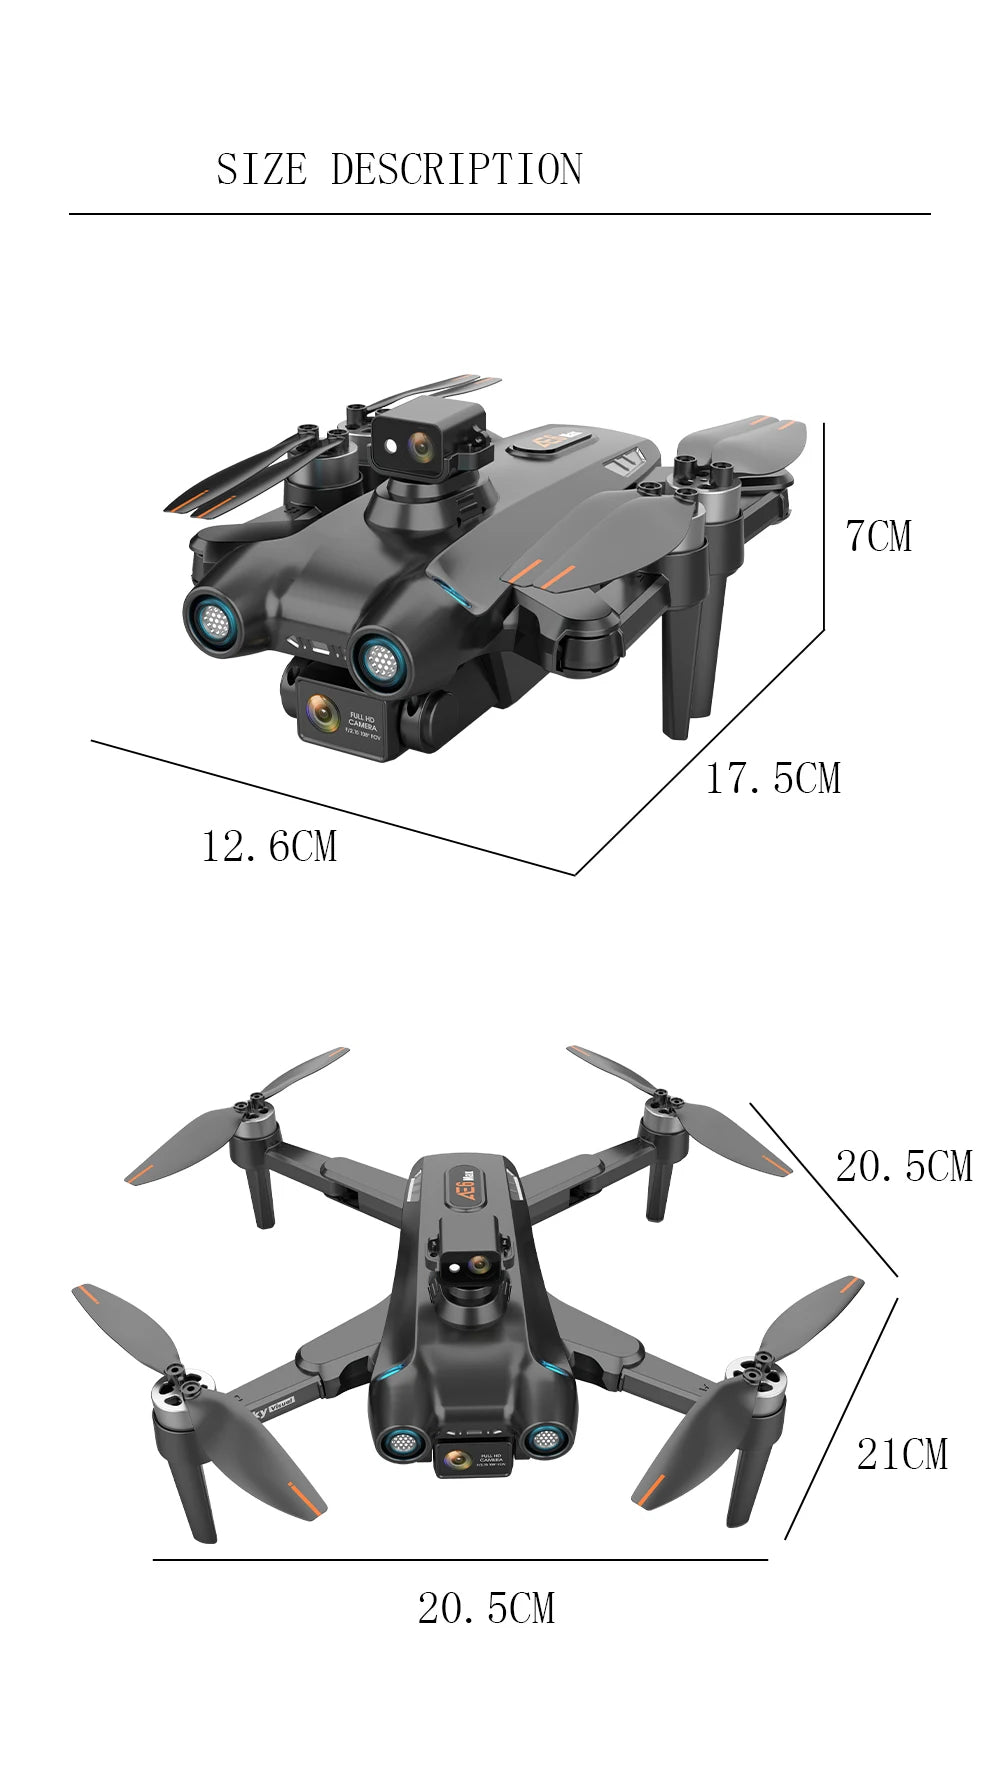 youngeast drone has 2.4g camera, led lights,3d